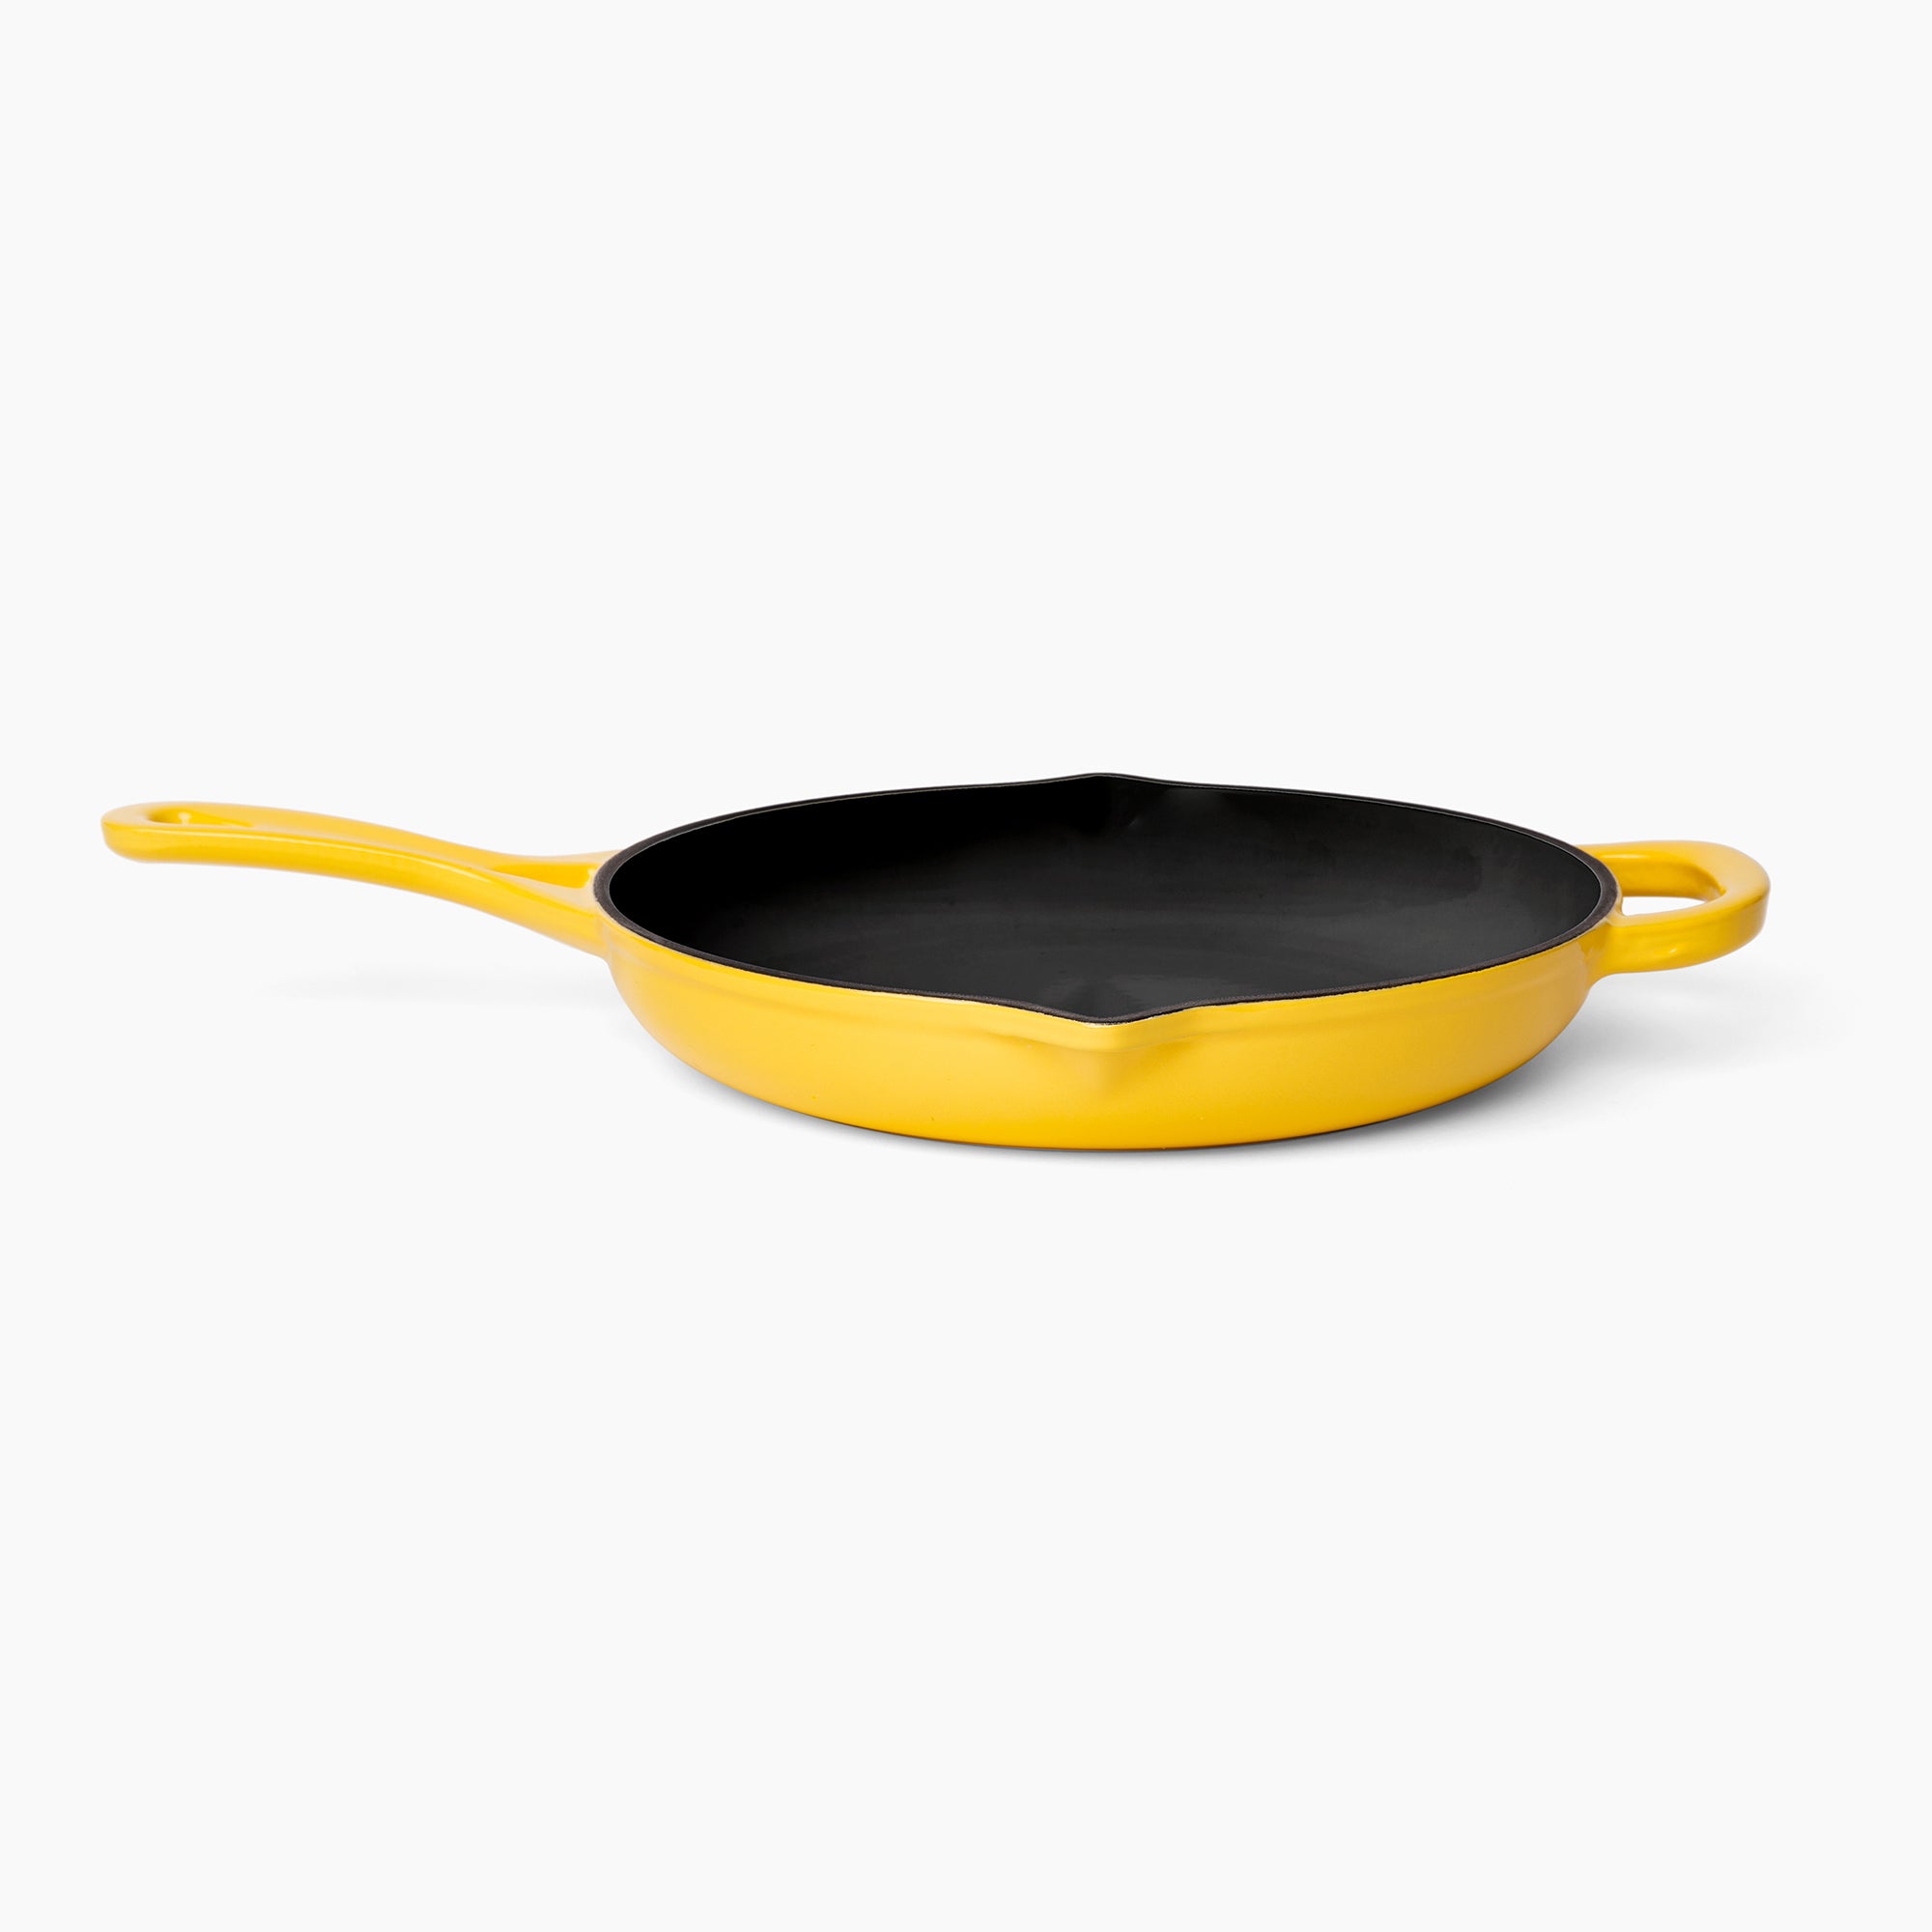 10.25 Deep Customized/ Personalized Cast Iron Skillet 